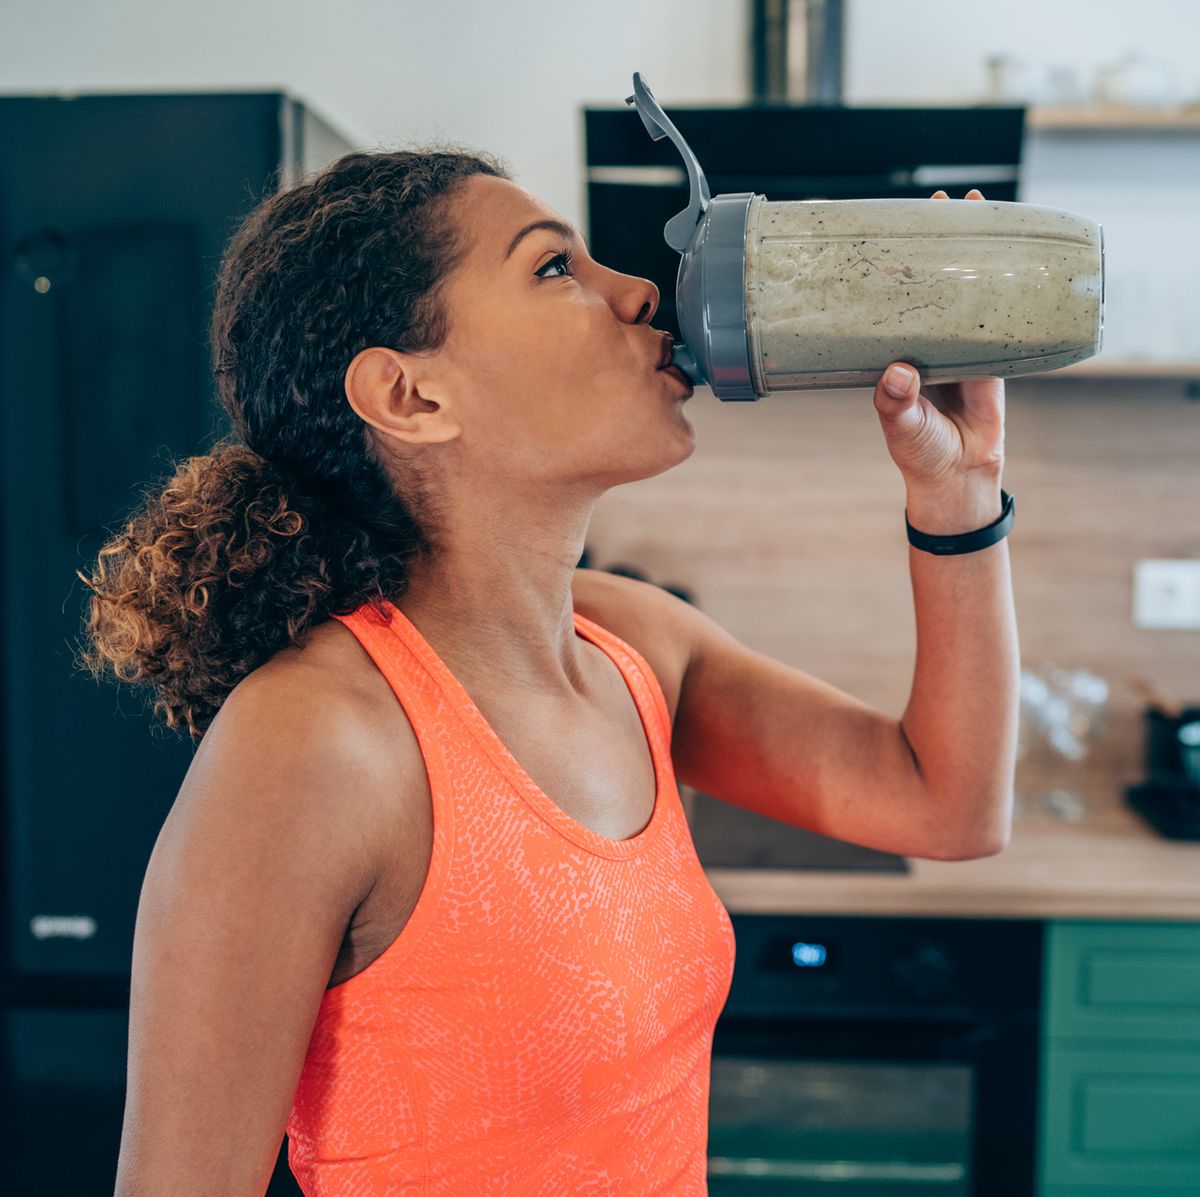 https://hips.hearstapps.com/hmg-prod/images/young-woman-drinking-protein-shake-after-workout-at-royalty-free-image-1671475046.jpg?crop=0.668xw:1.00xh;0.167xw,0&resize=1200:*